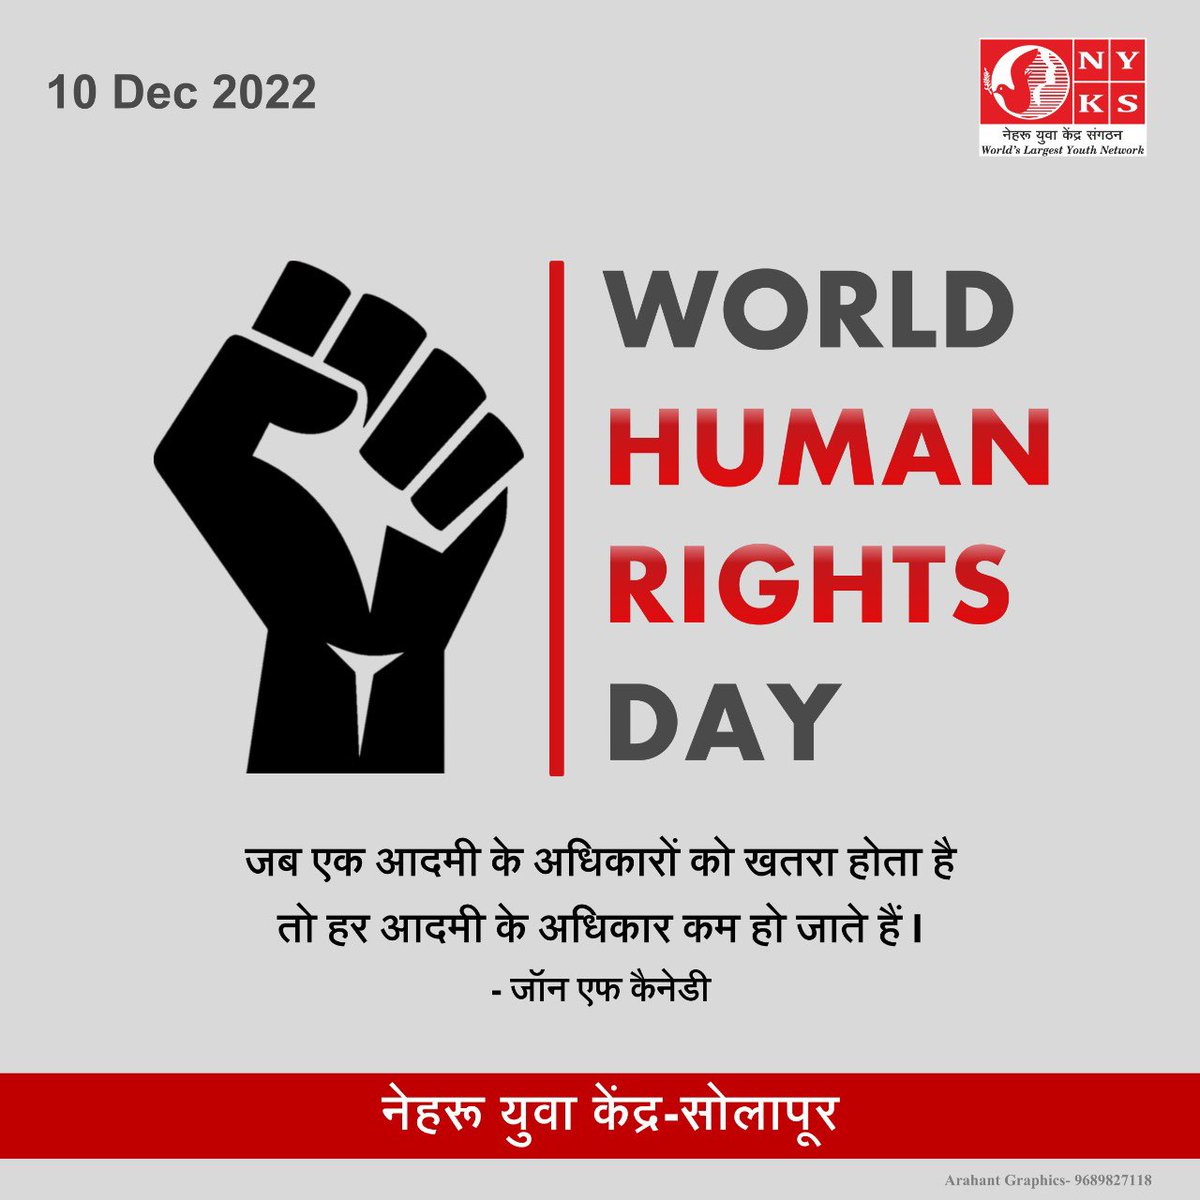 On #WorldHumanRightsDay, let's reaffirm our commitment to building a world where everyone is treated with respect and dignity #nyksindia #nyksmahagoa #nyksolapur